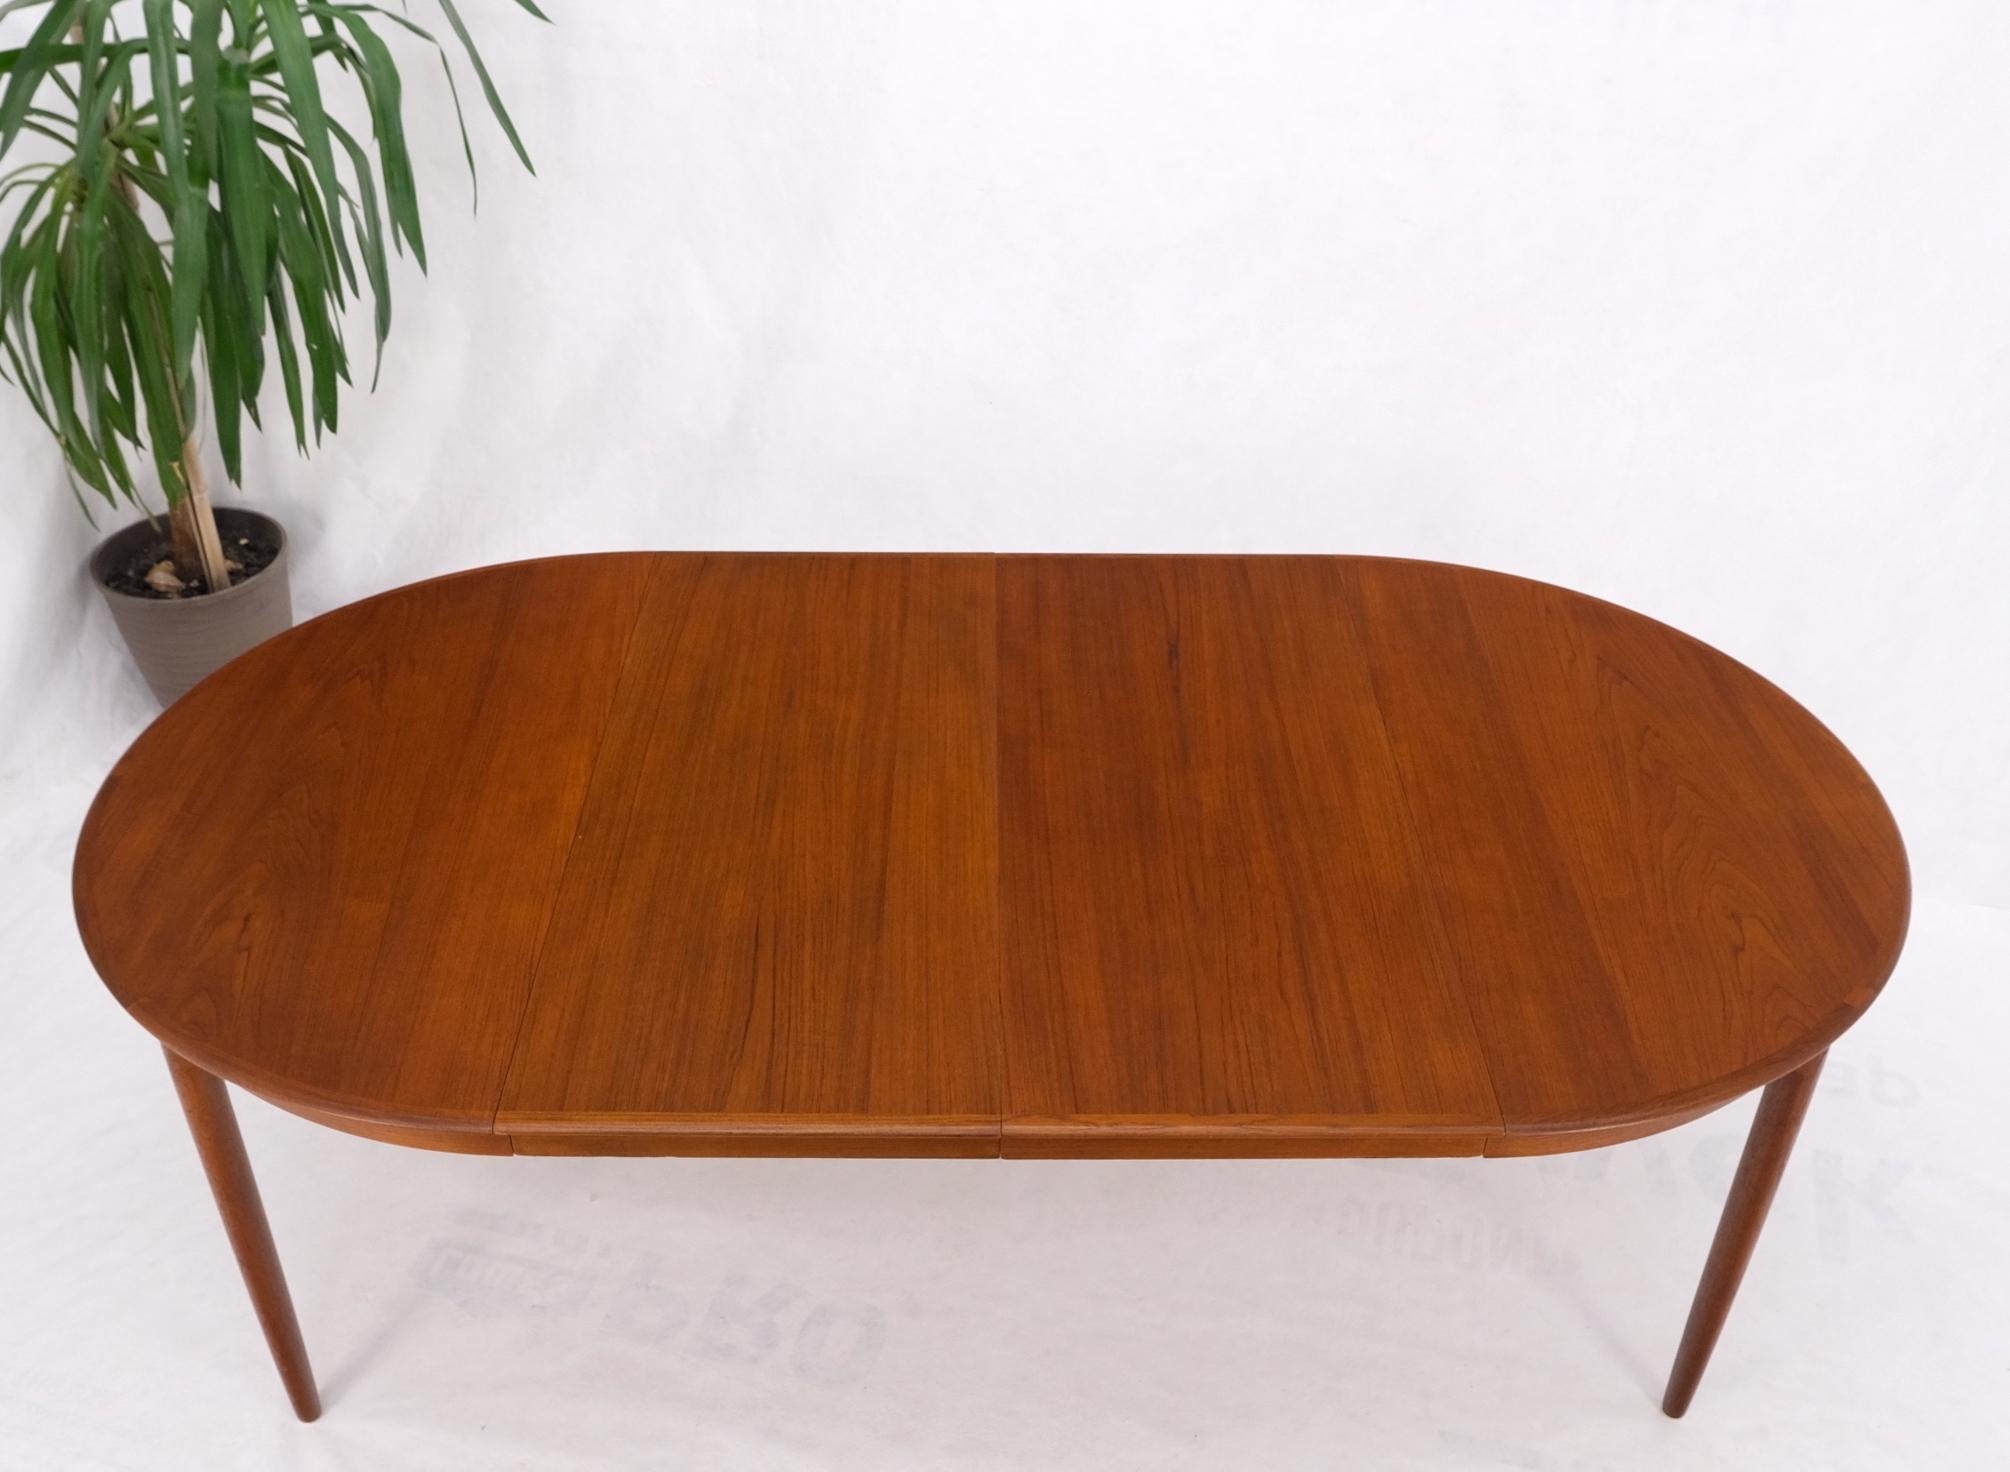 Danish Teak Mid-Century Modern Round Dining Table w/ Two Extension Boards Leafs For Sale 6